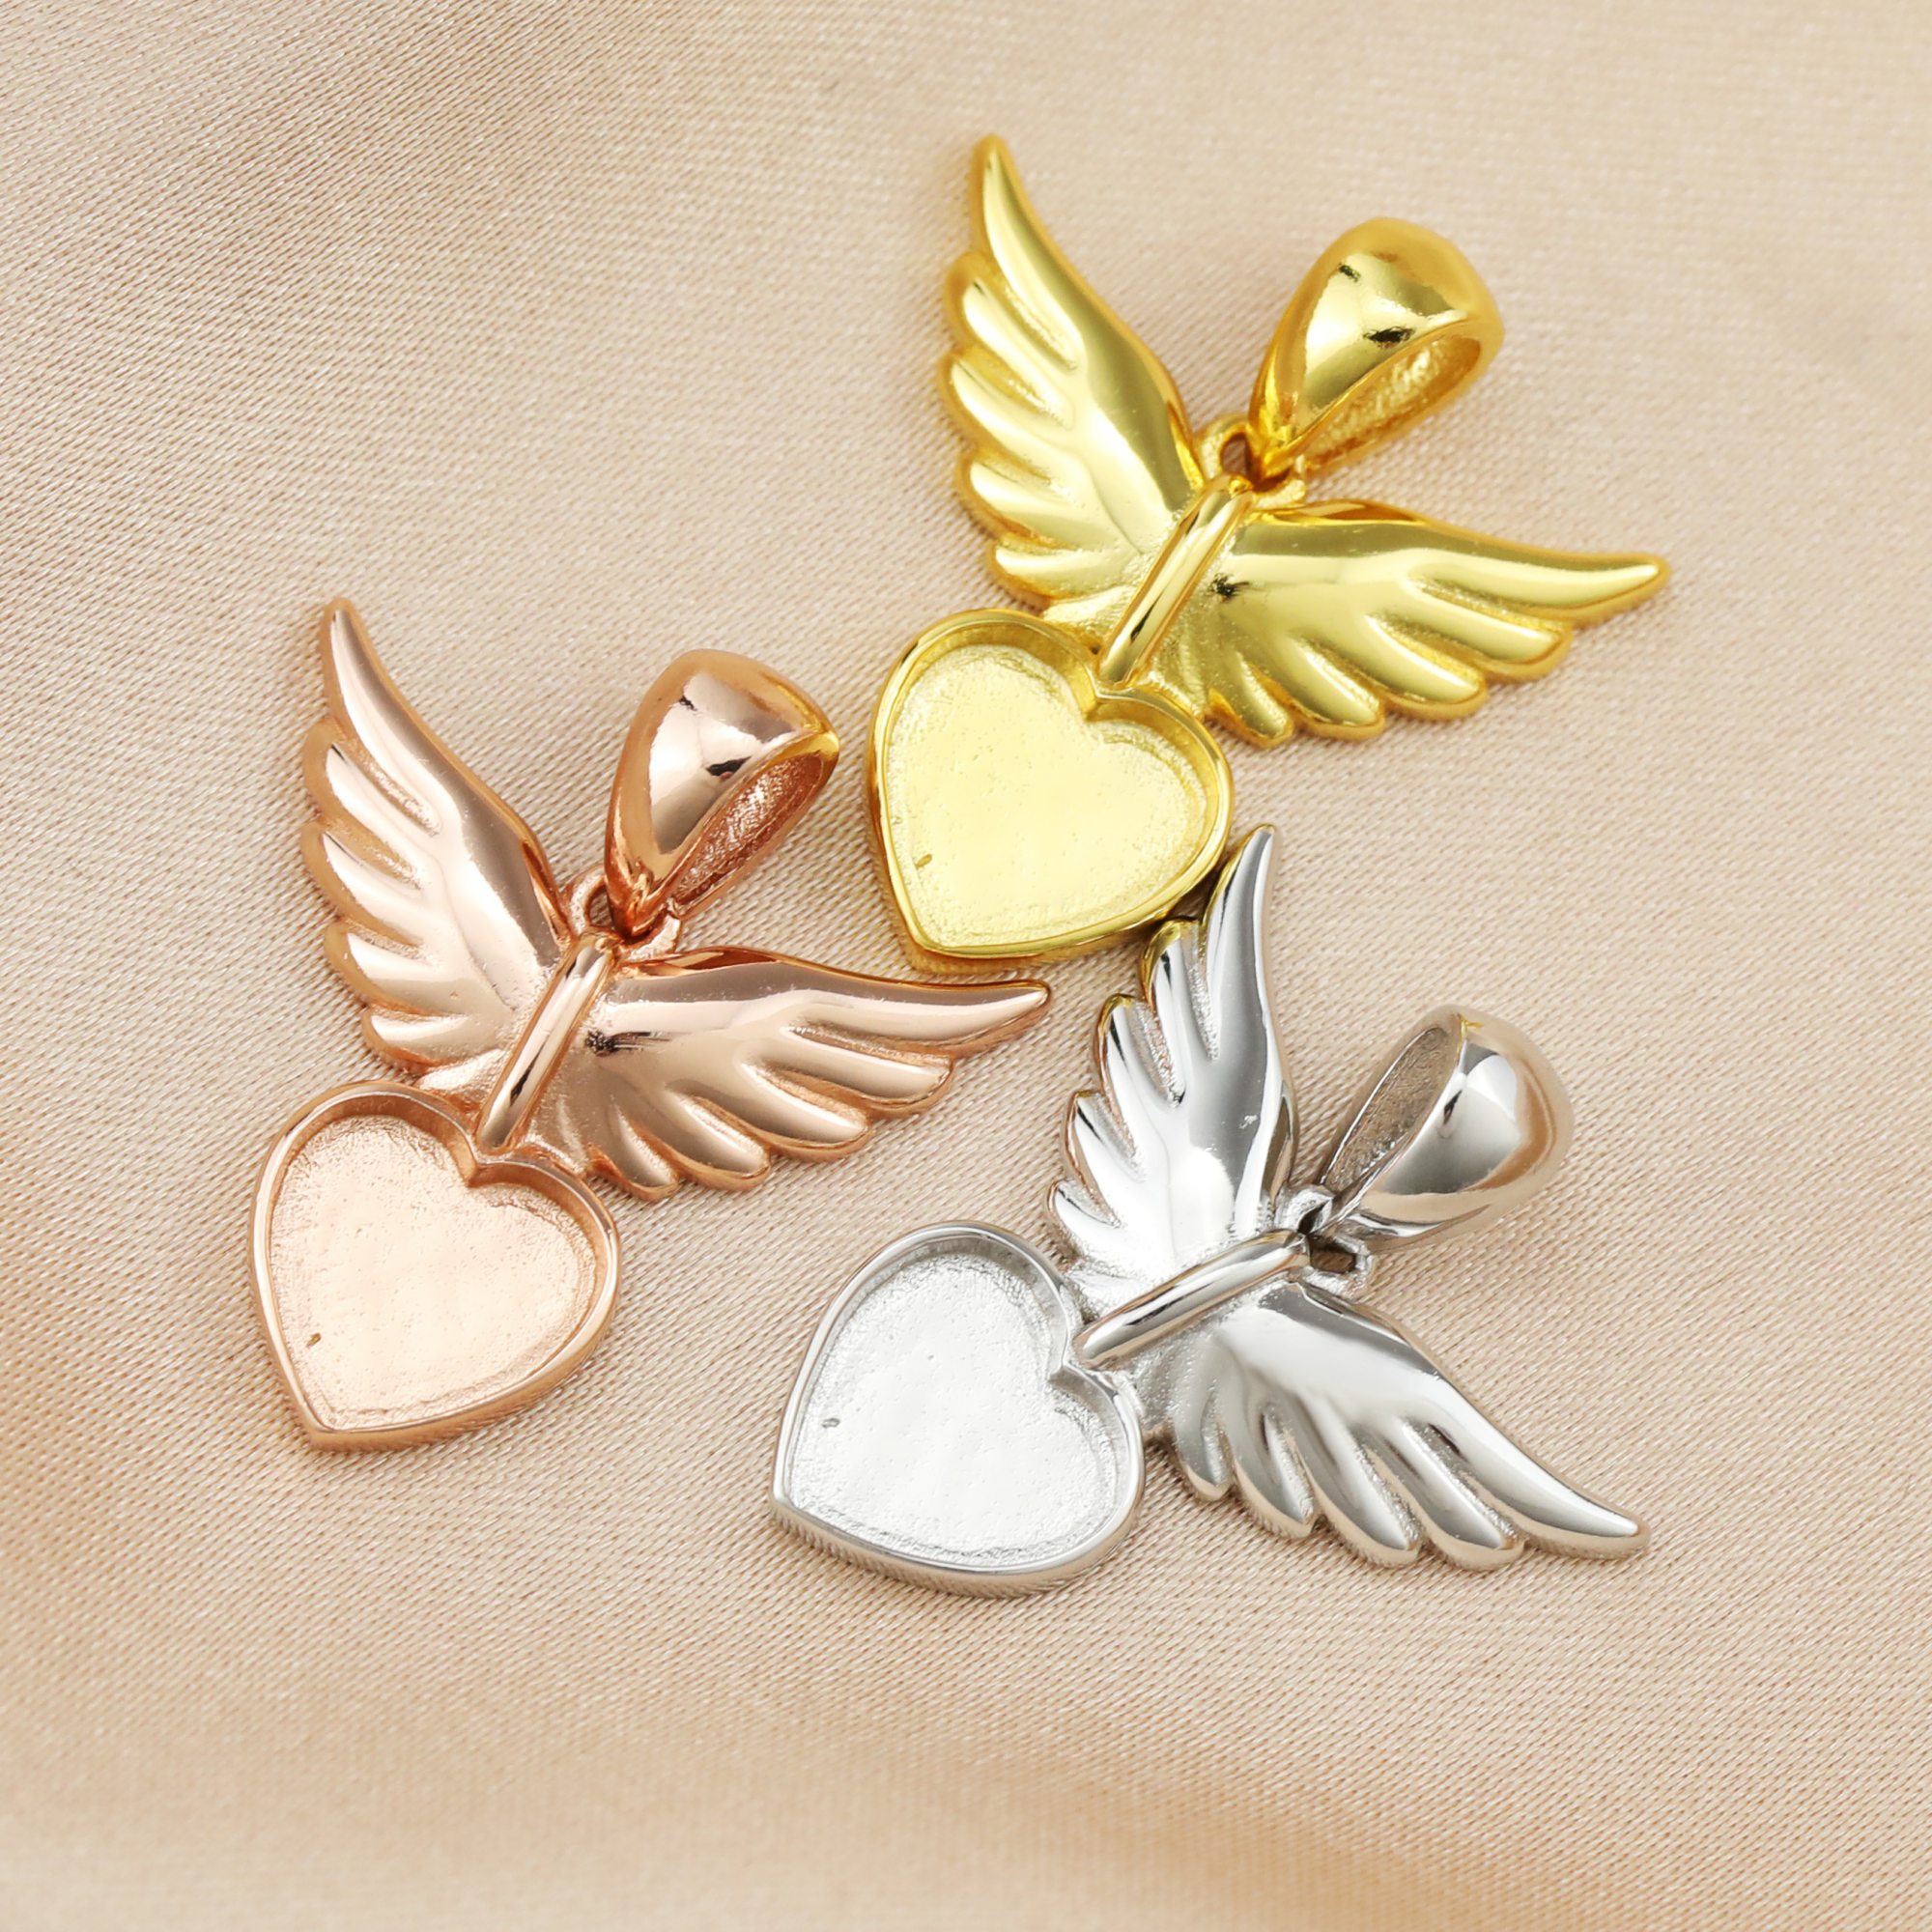 8MM Keepsake Breast Milk Resin Heart Angel Wing Pendant Prong Settings Mother Baby Solid 925 Sterling Silver Rose Gold Plated Charm Bezel 1431131 - Click Image to Close